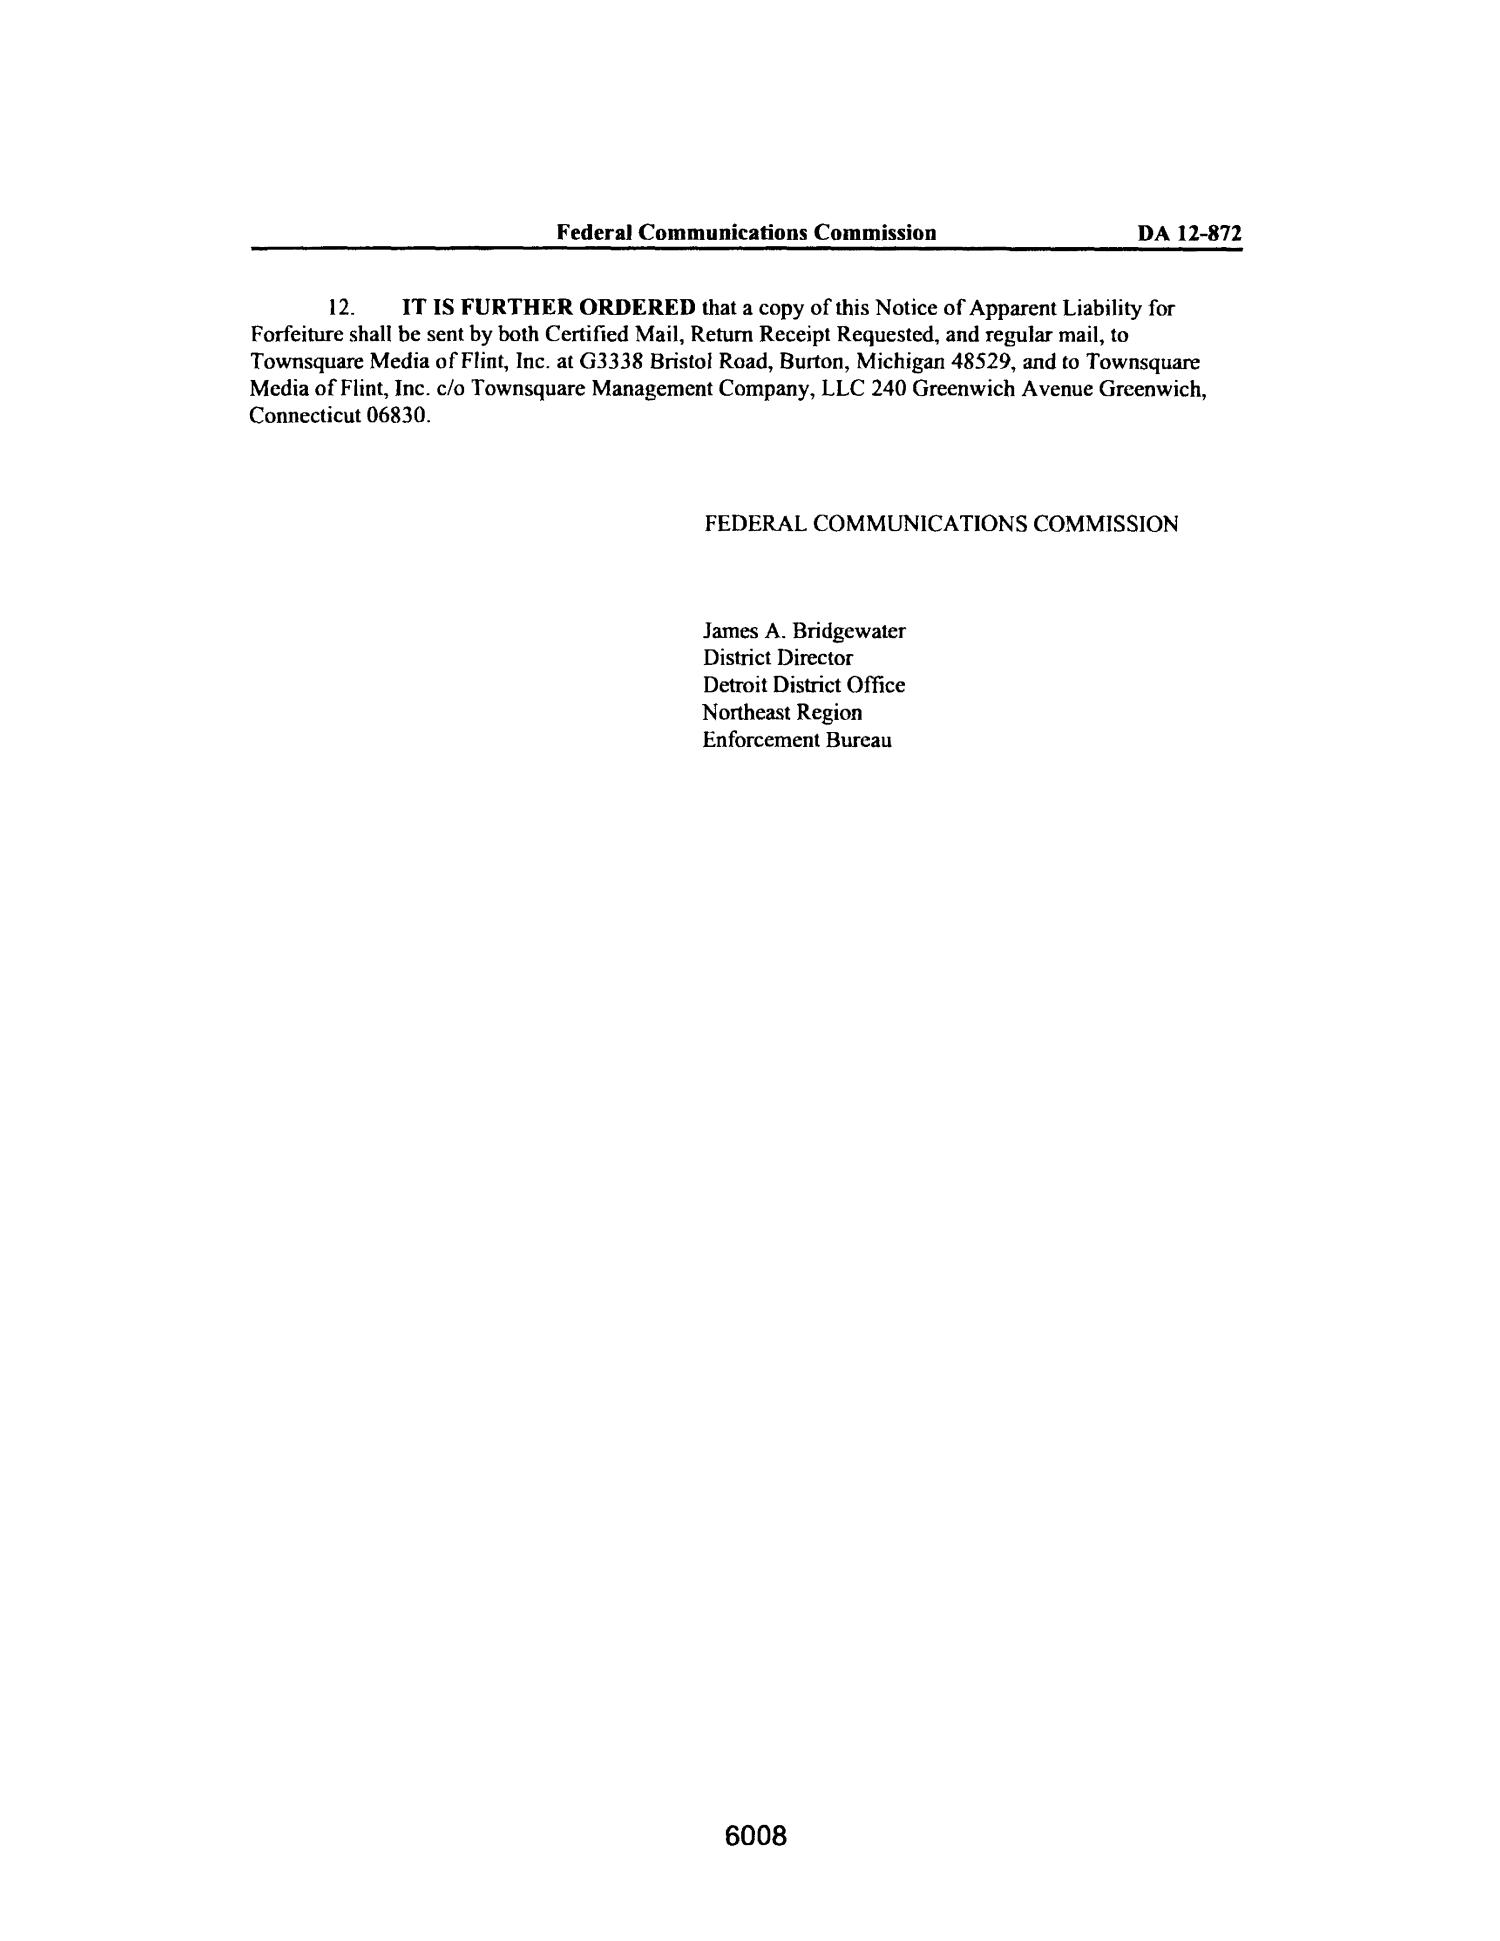 FCC Record, Volume 27, No. 7, Pages 5674 to 6652, May 23 - June 15, 2012
                                                
                                                    6008
                                                